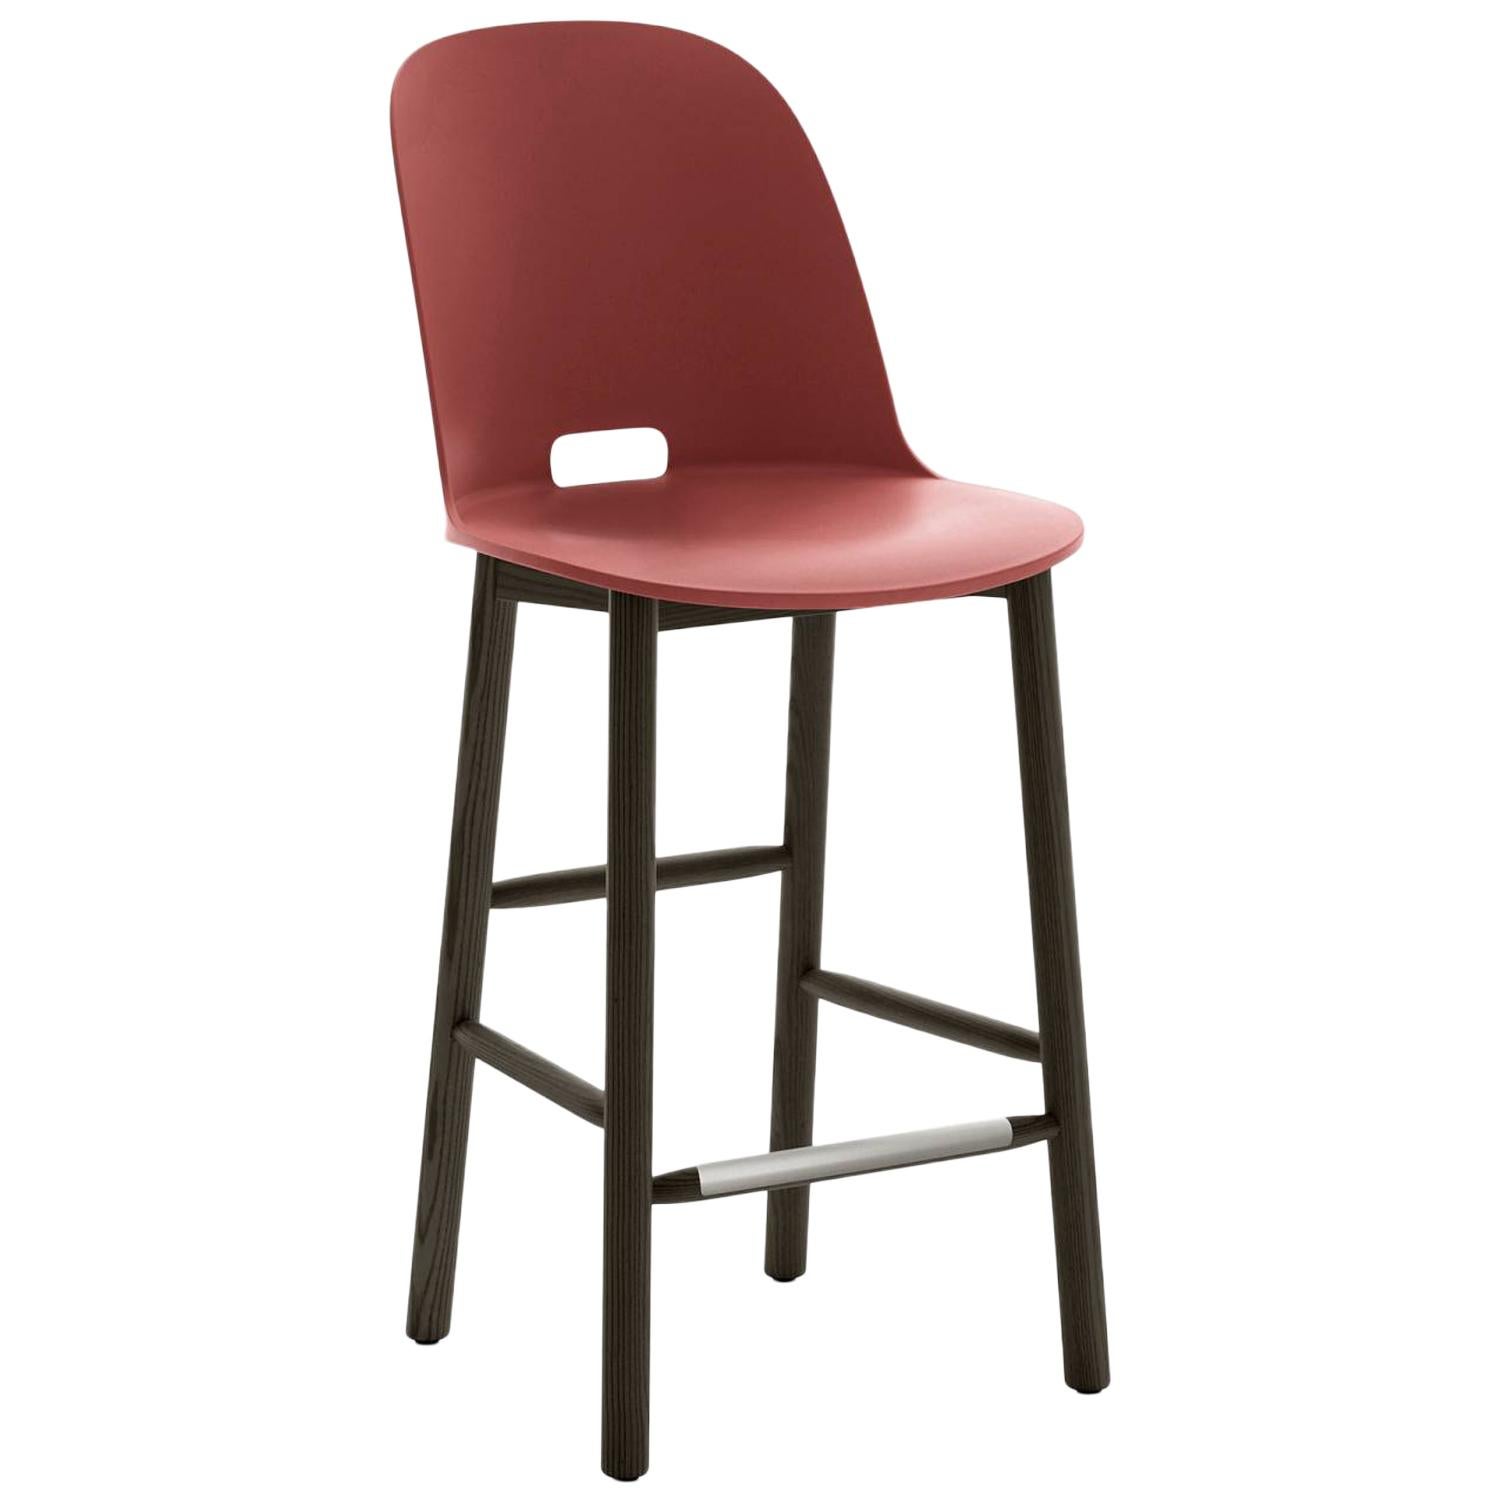 Emeco Alfi Counter Stool in Red & Dark Ash with High Back by Jasper Morrison For Sale